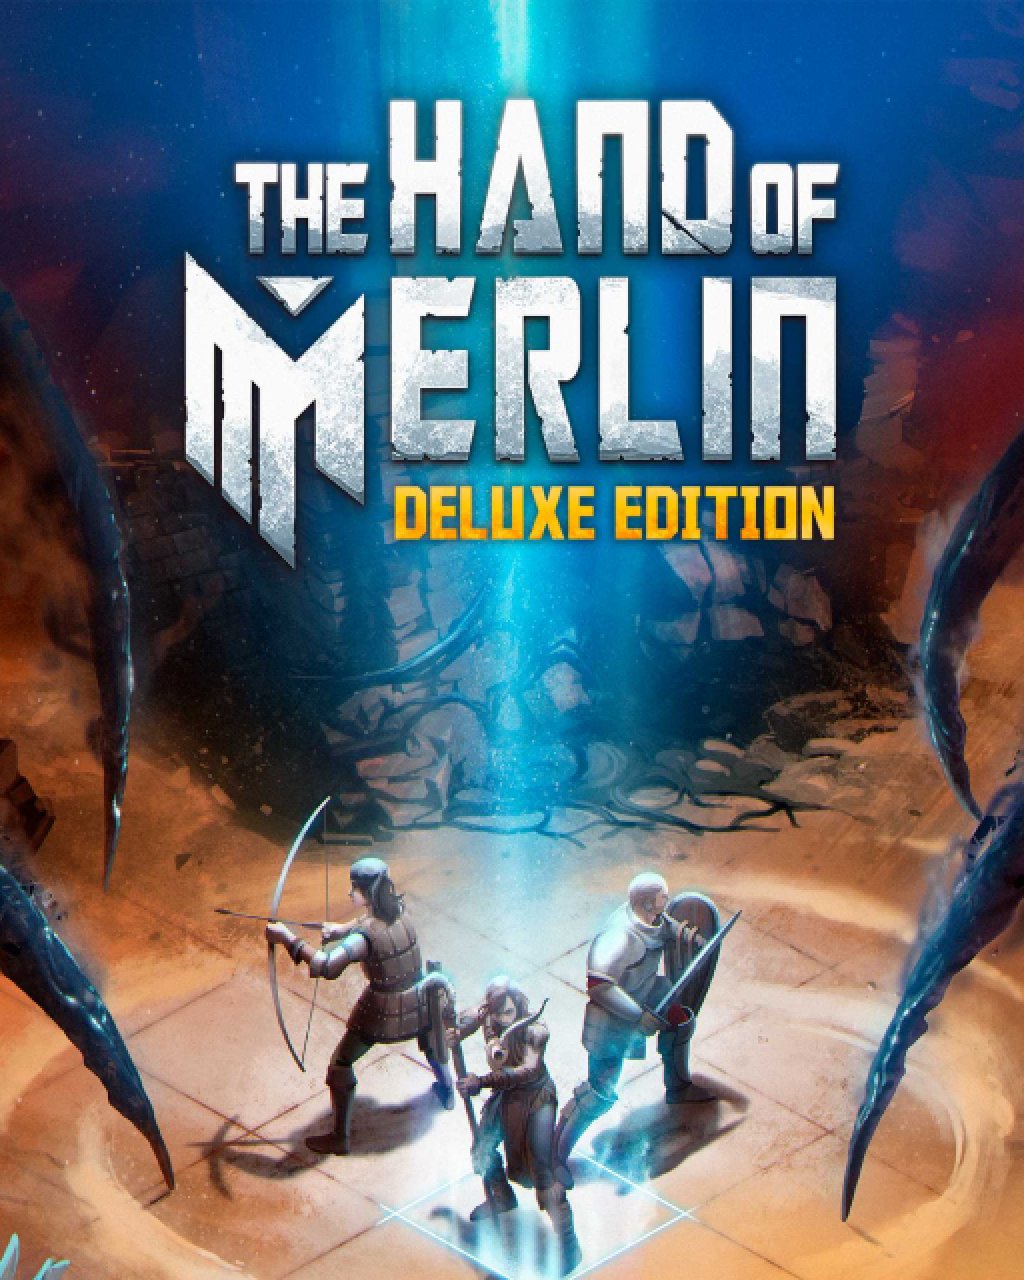 The Hand of Merlin Deluxe Edition